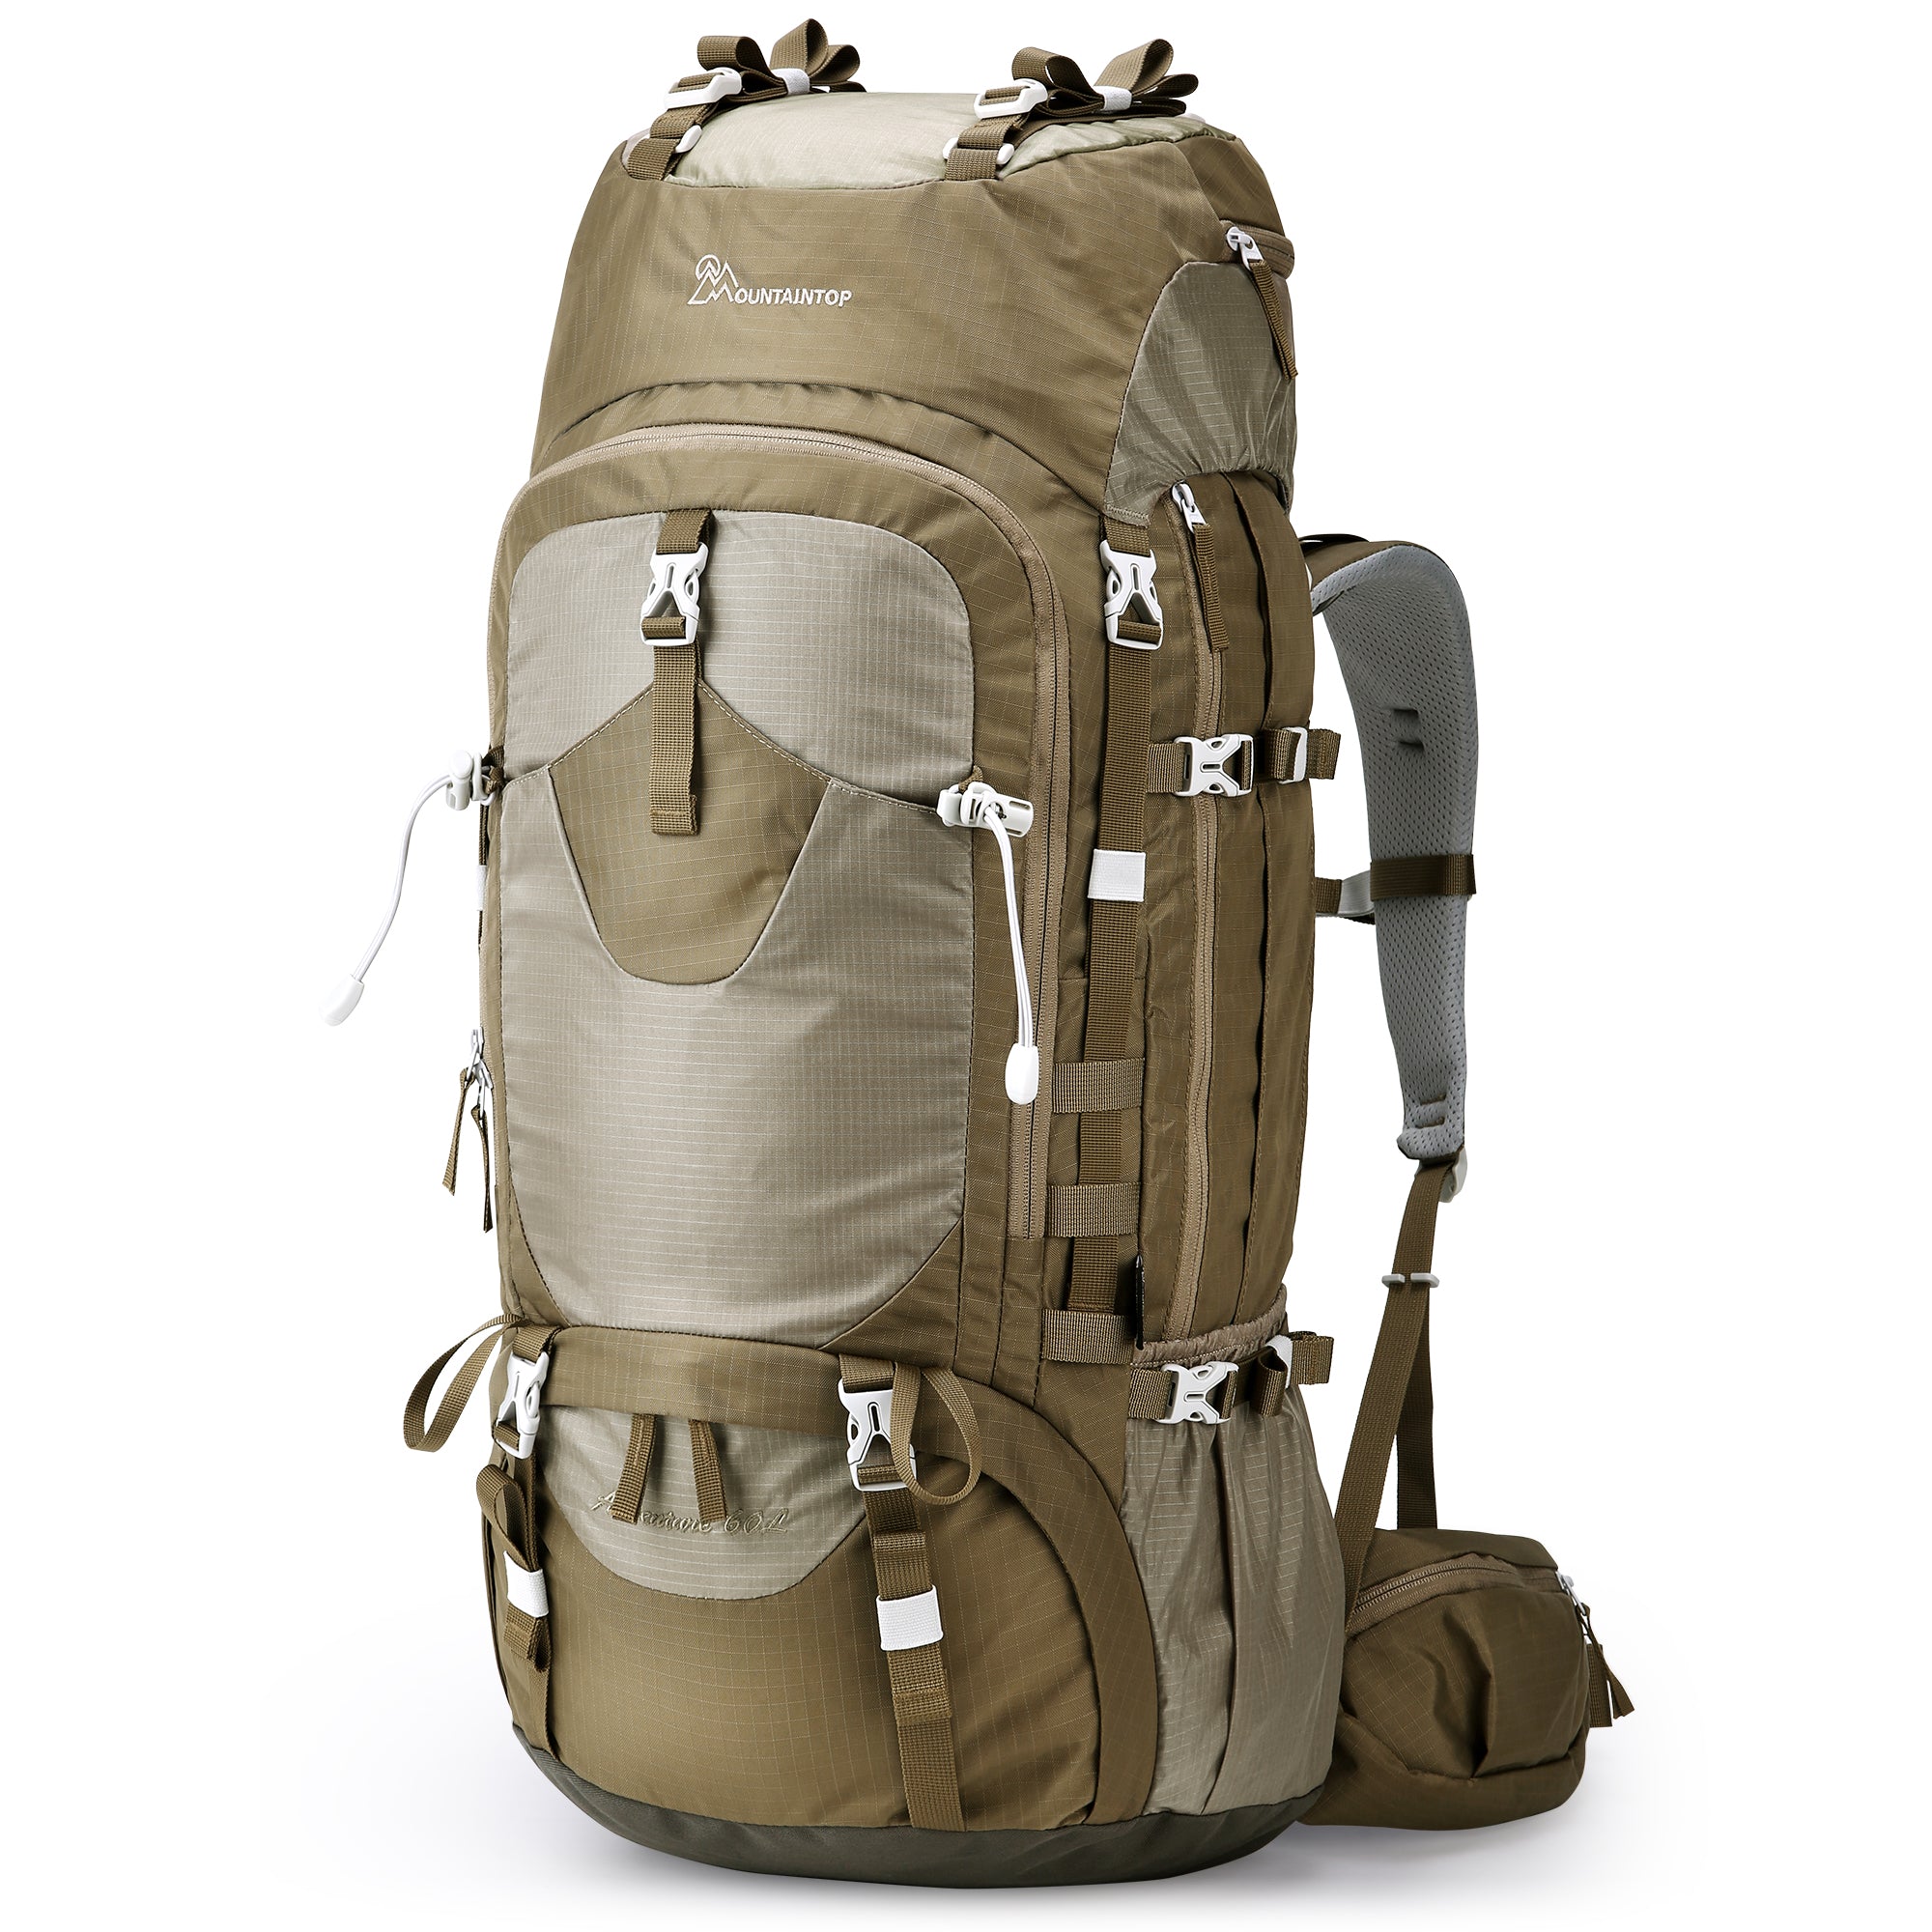 MOUNTAINTOP® 60L Internal Frame Backpack with Rain Cover